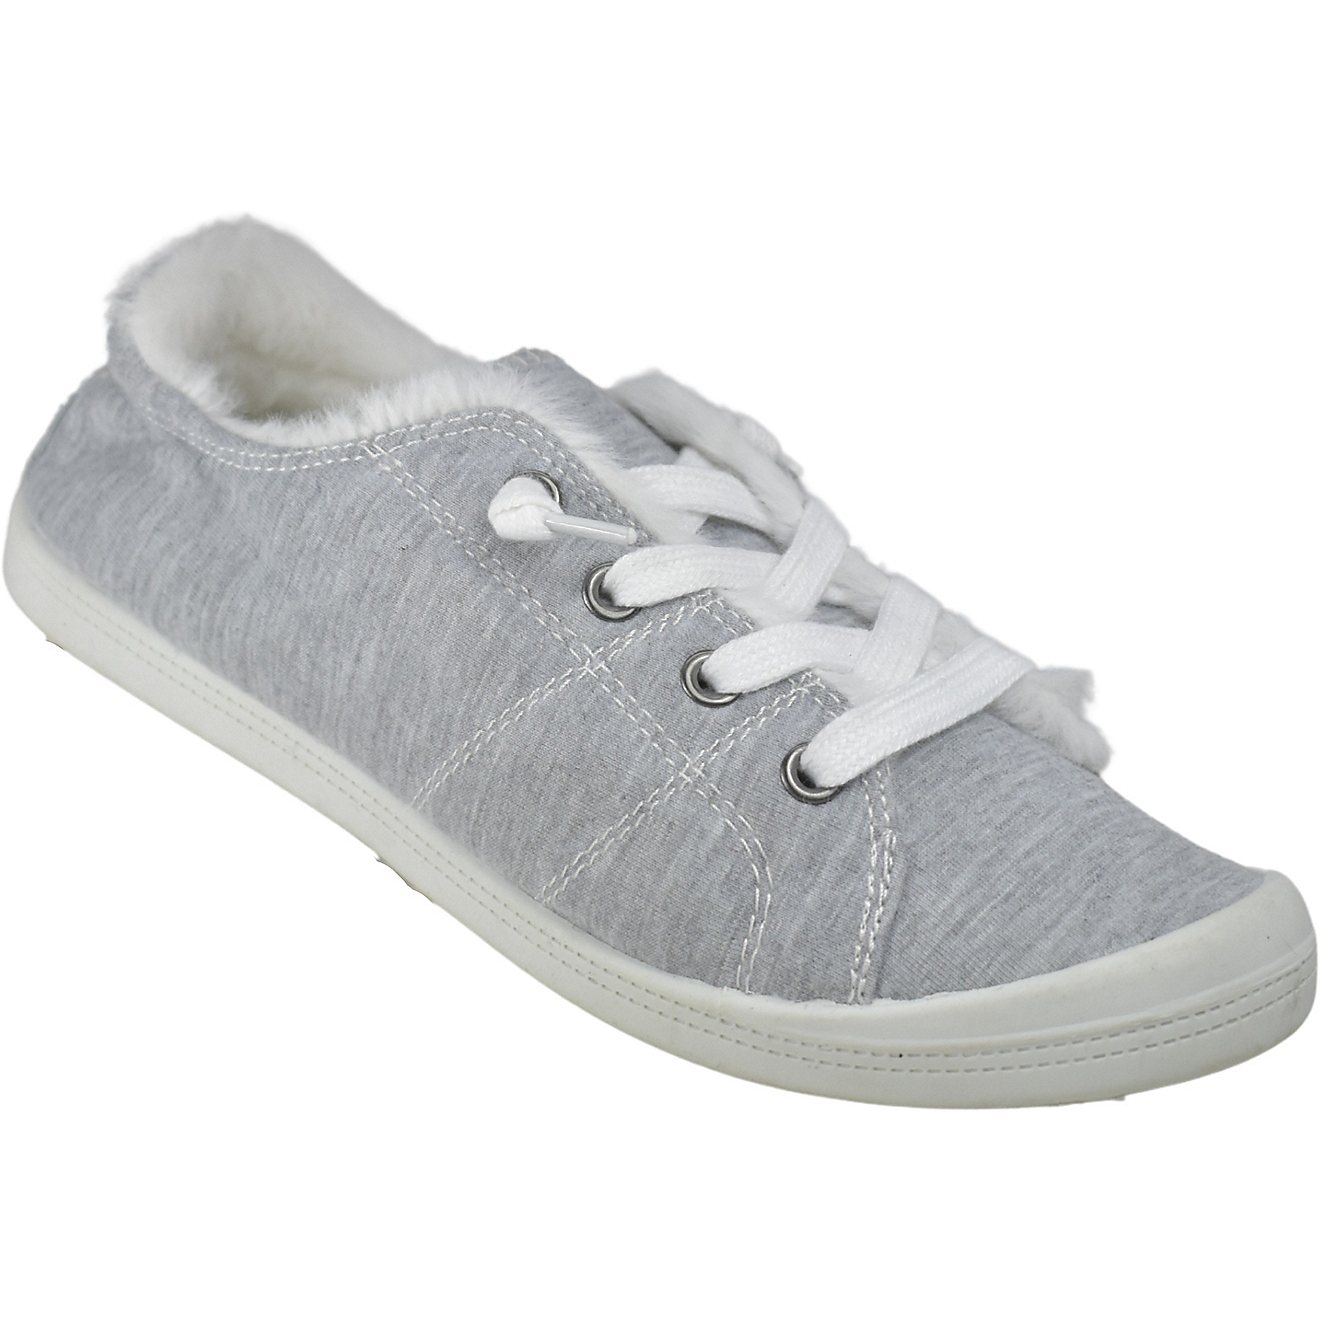 Shaboom Women's Canvas Shoes w/ Long Fur                                                                                         - view number 2